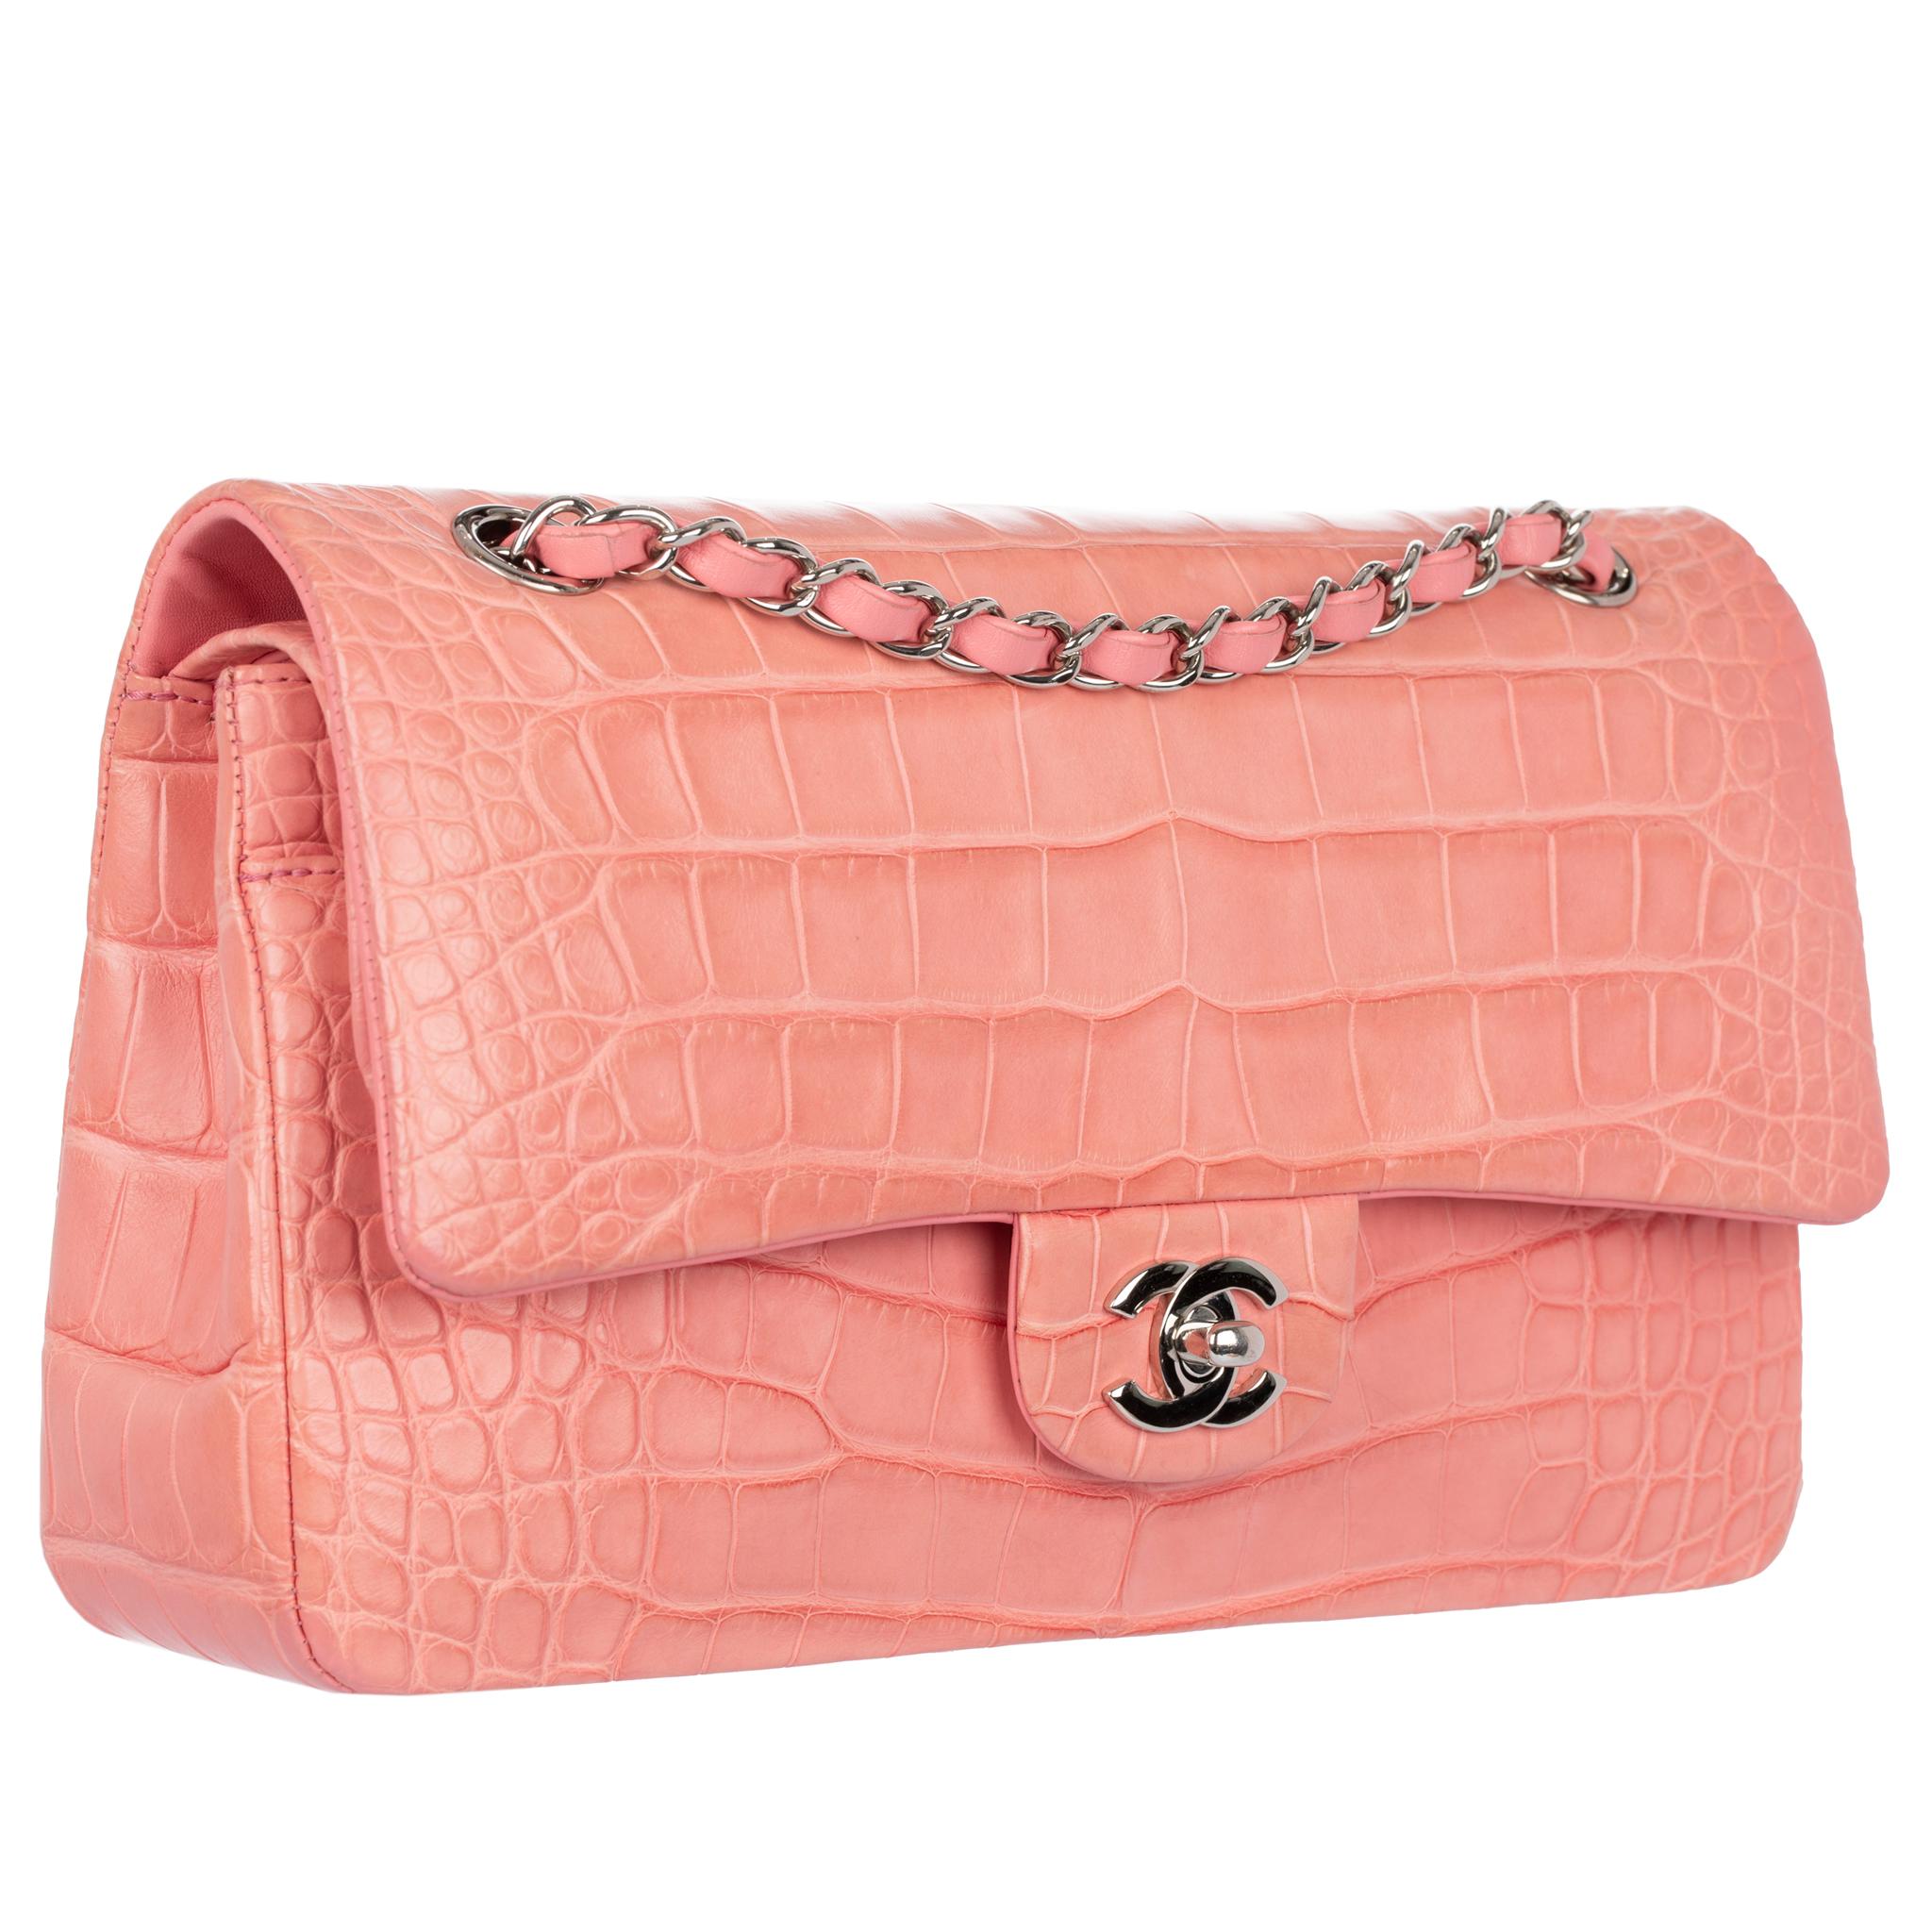 This Chanel Medium Double Classic Flap Bag is truly a rare gem. This model is no longer produced, making it a must-have item for any bag collector. Constructed from coral pink matte crocodile leather and silver tone hardware, it is the perfect